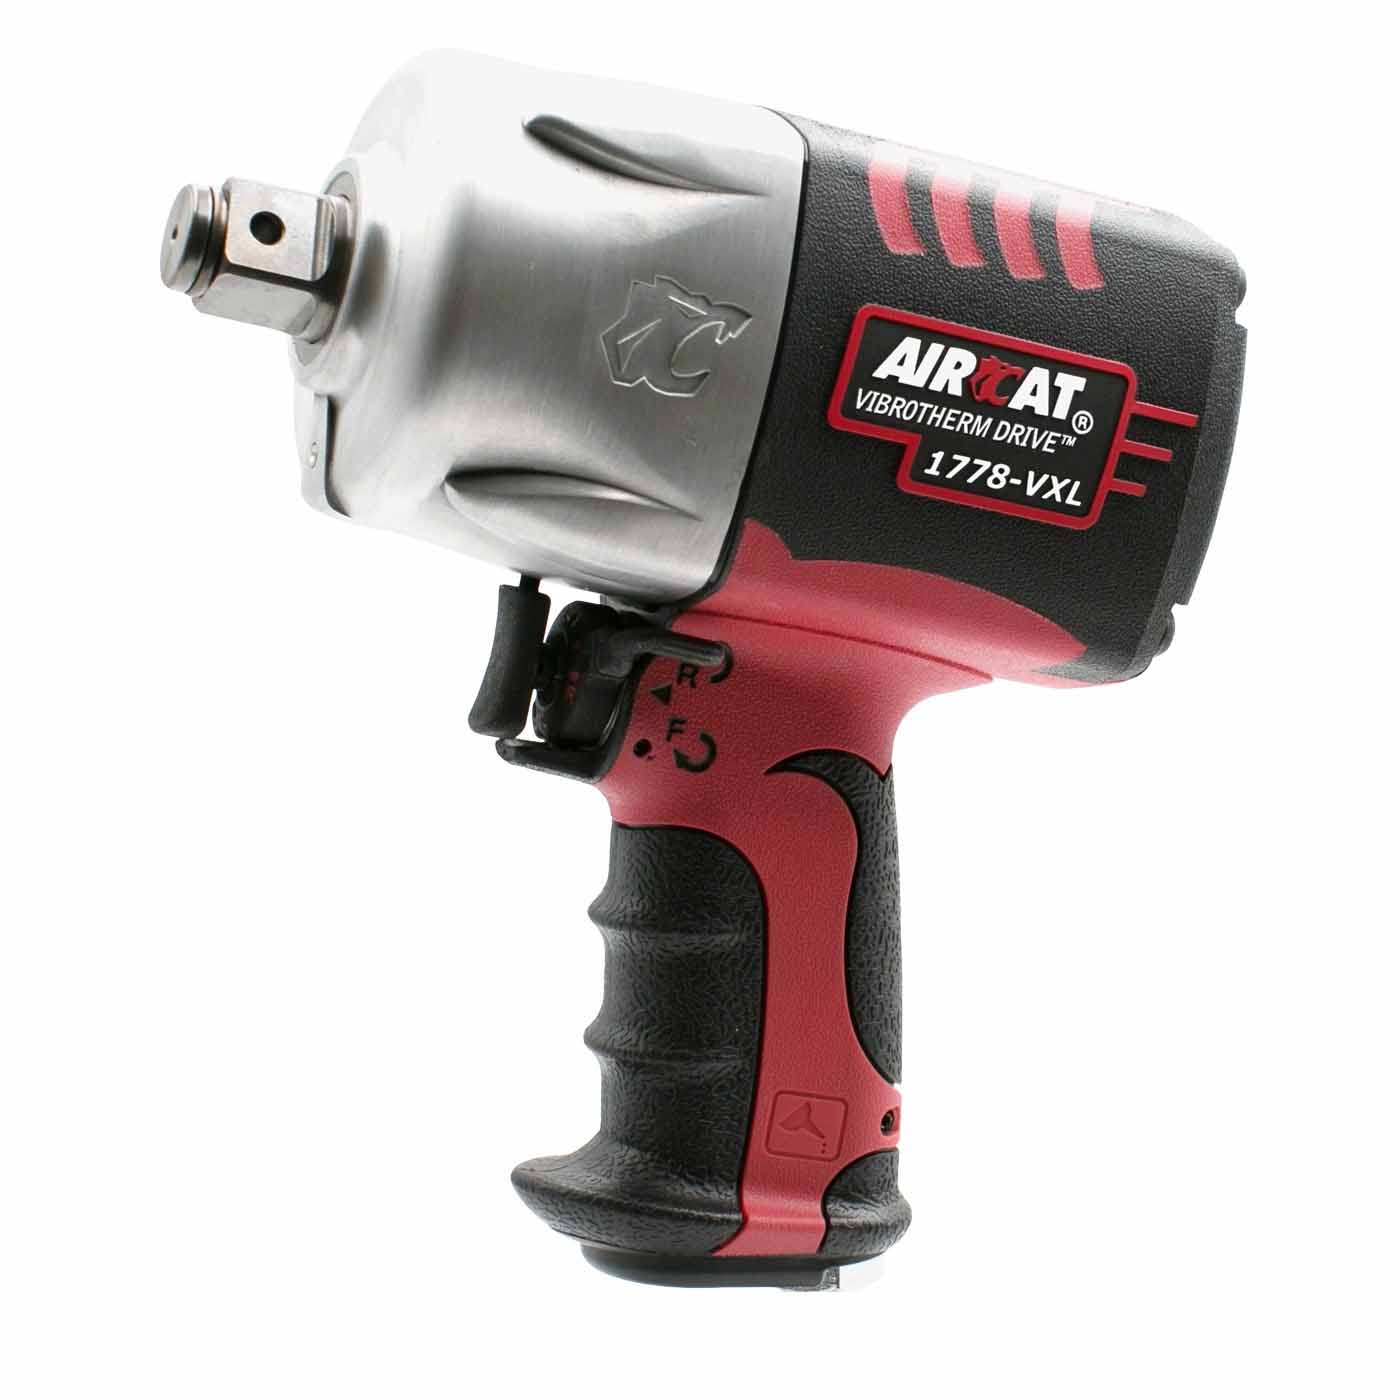 Half inch impact wrench